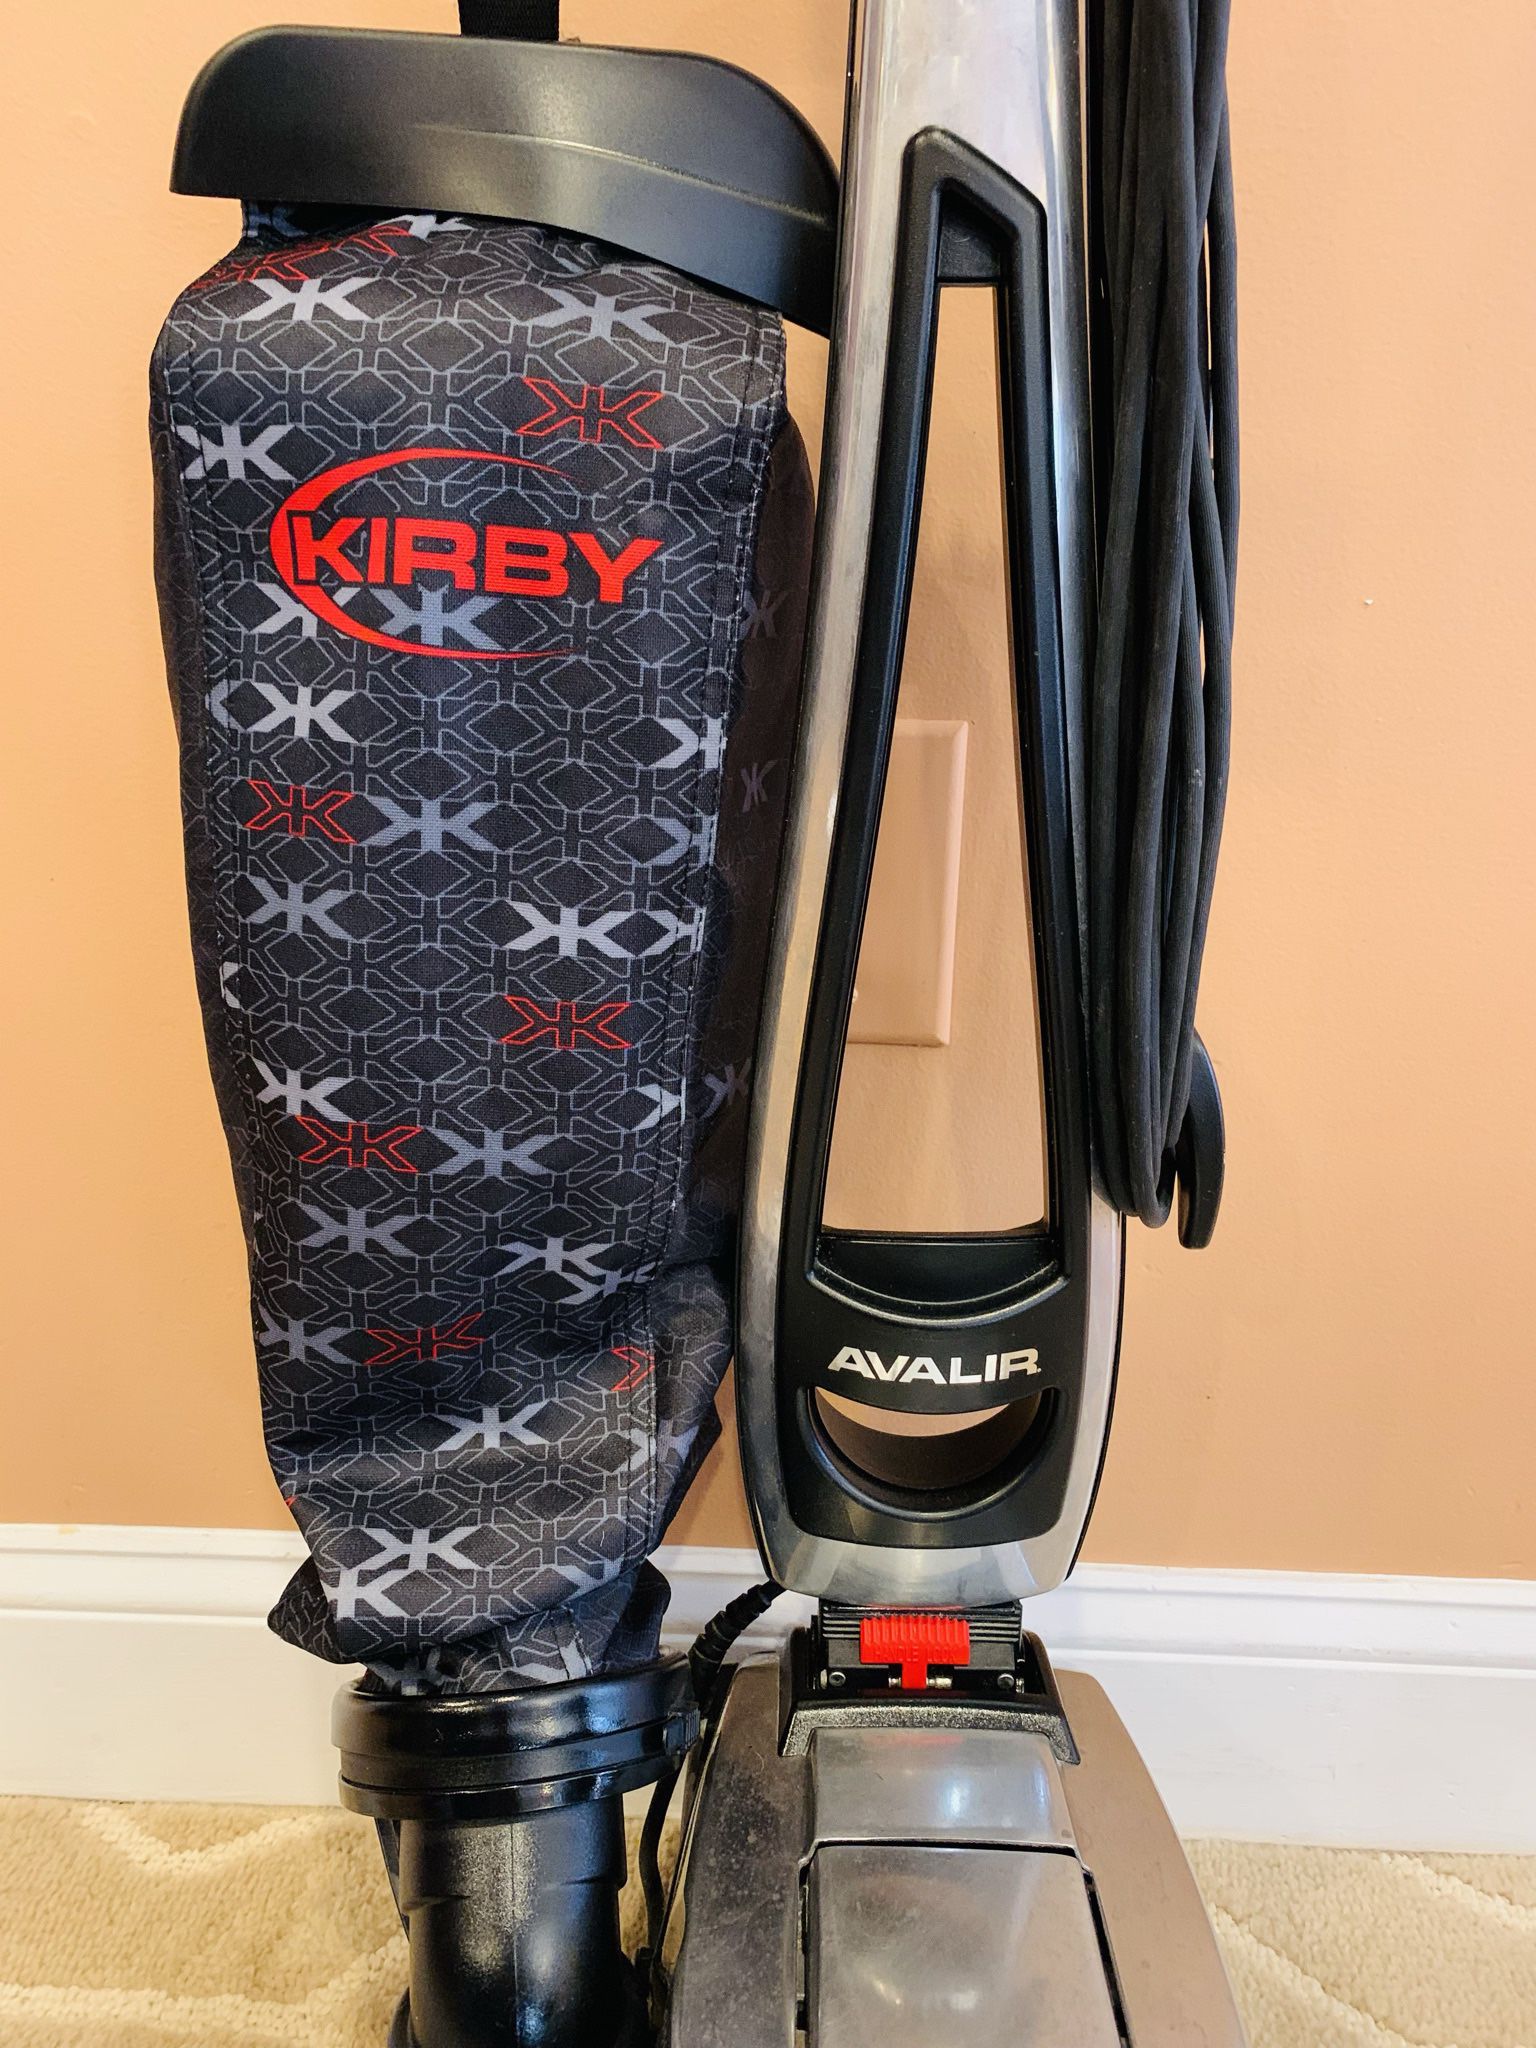 Kirby Avalir vacuum cleaner with attachments